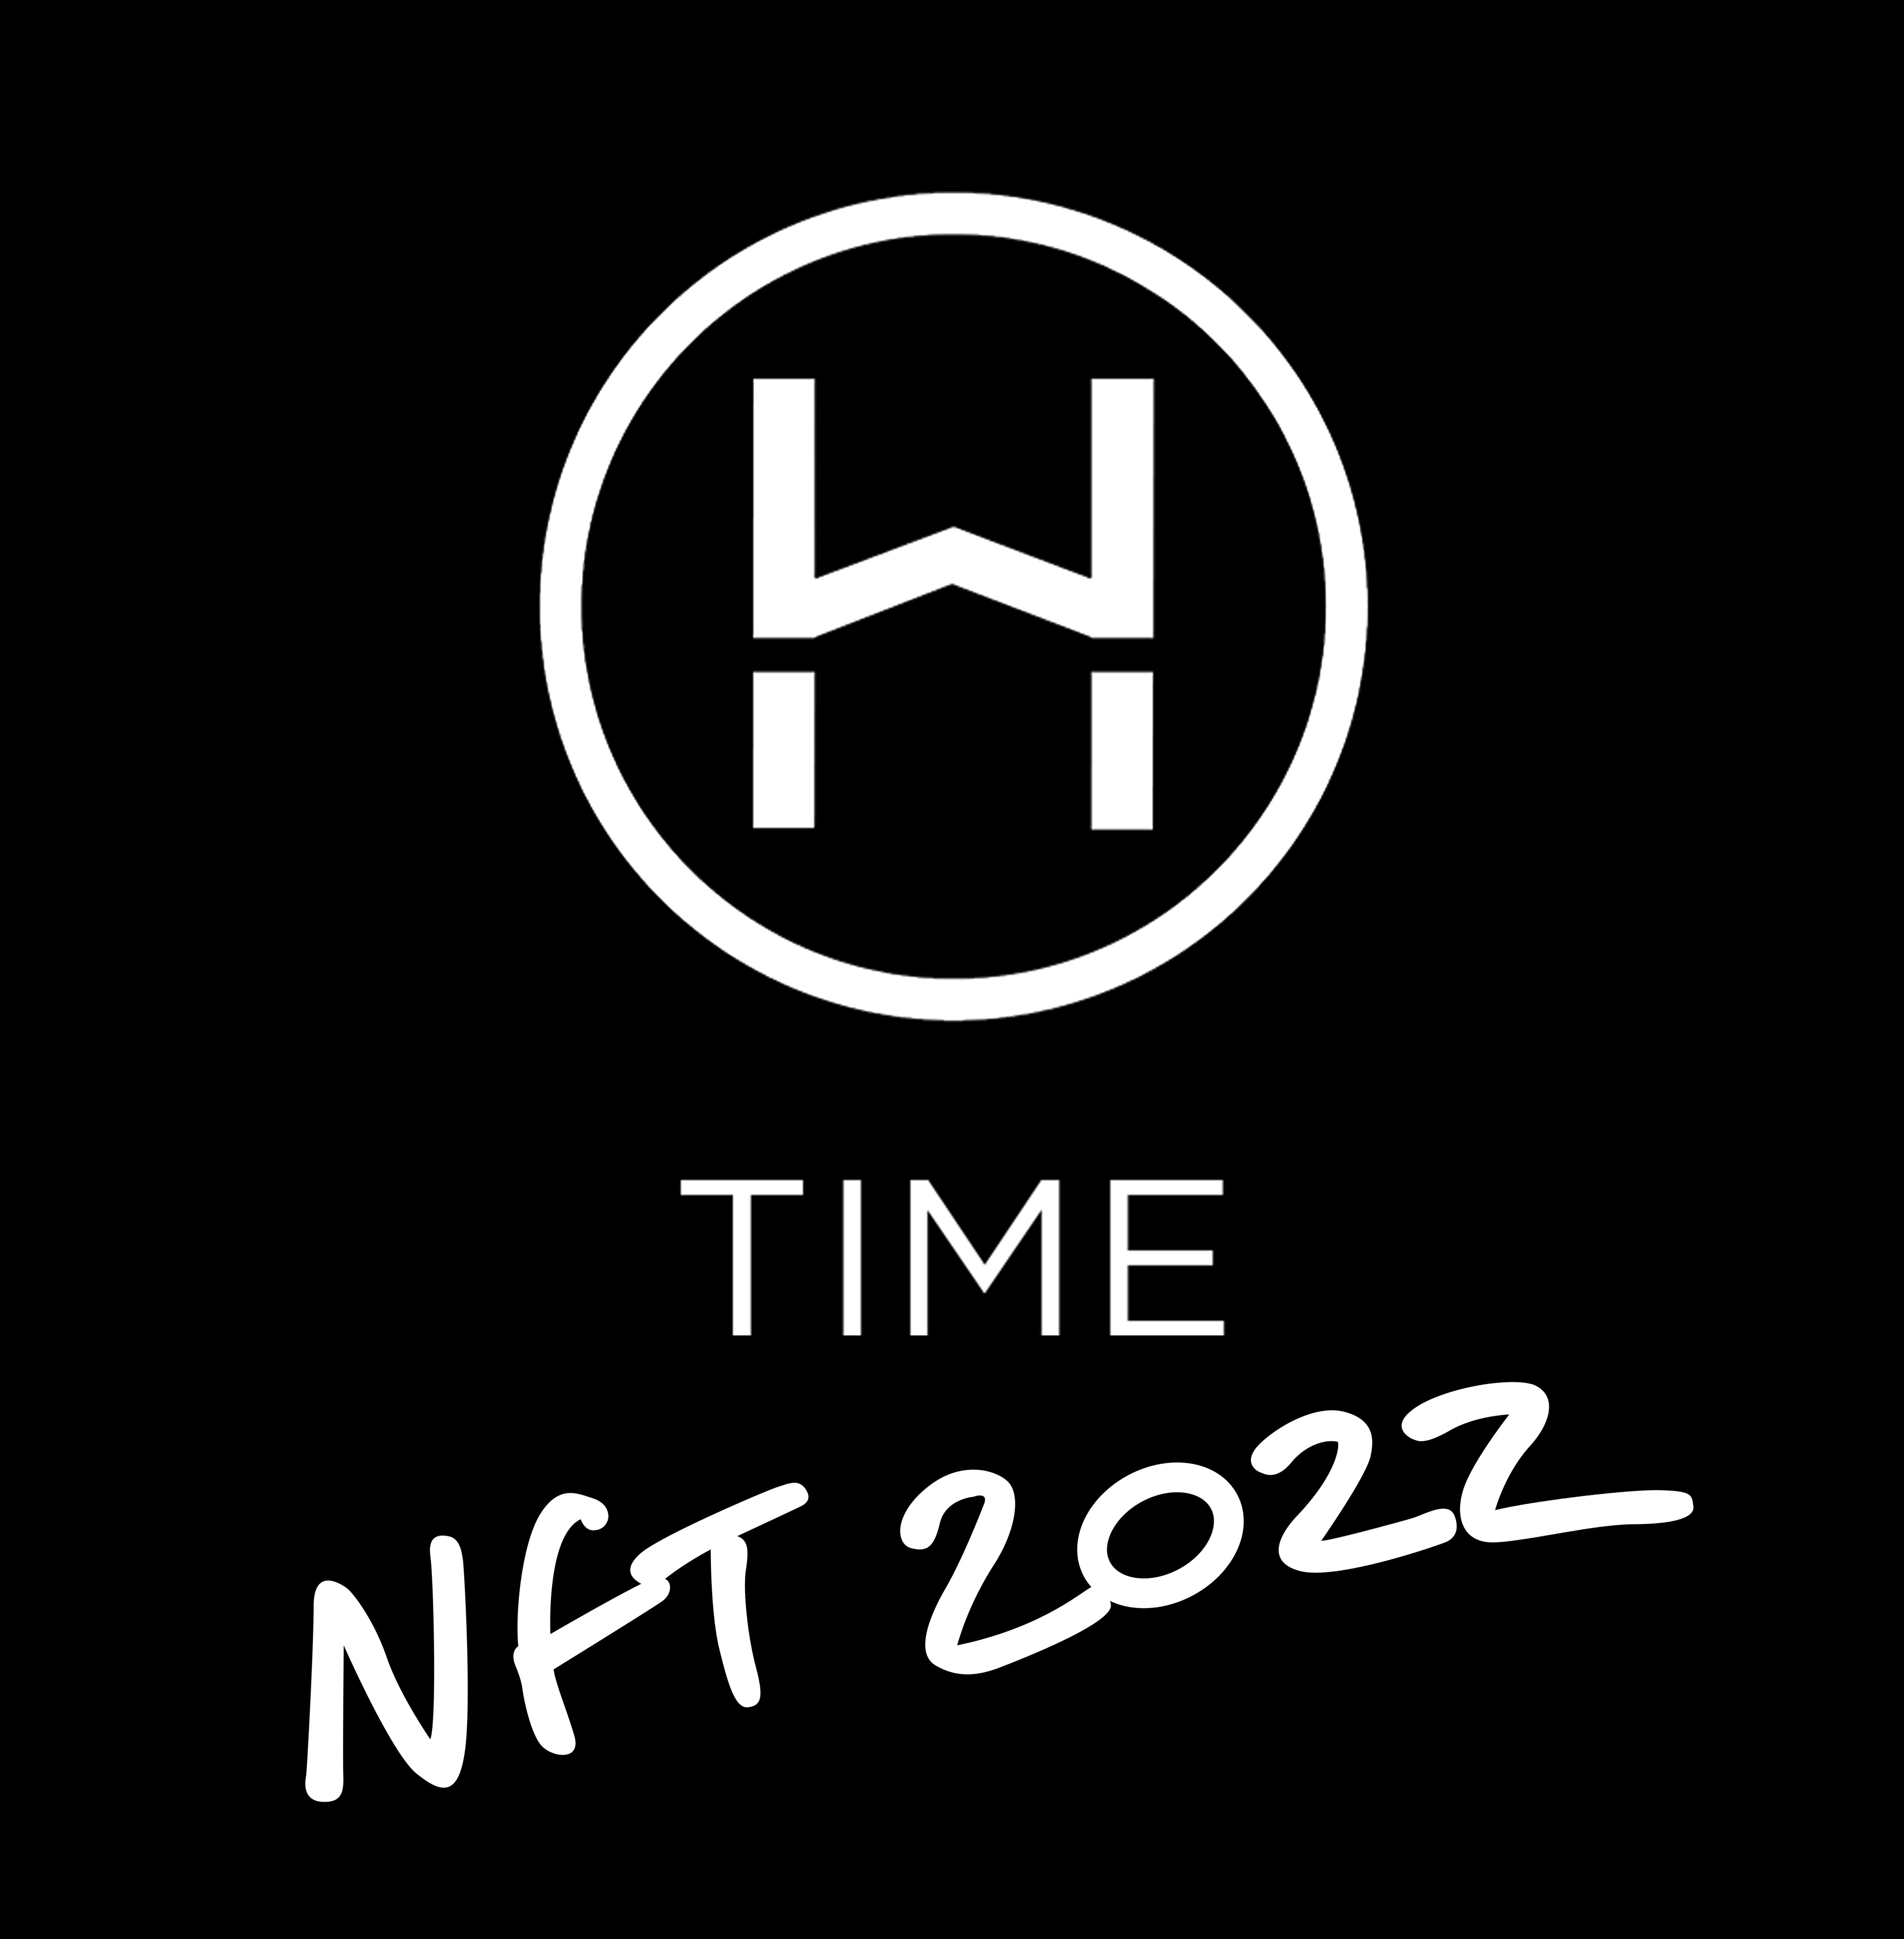 The lastest investment opportunity with Hagley West - HW Time NFTs